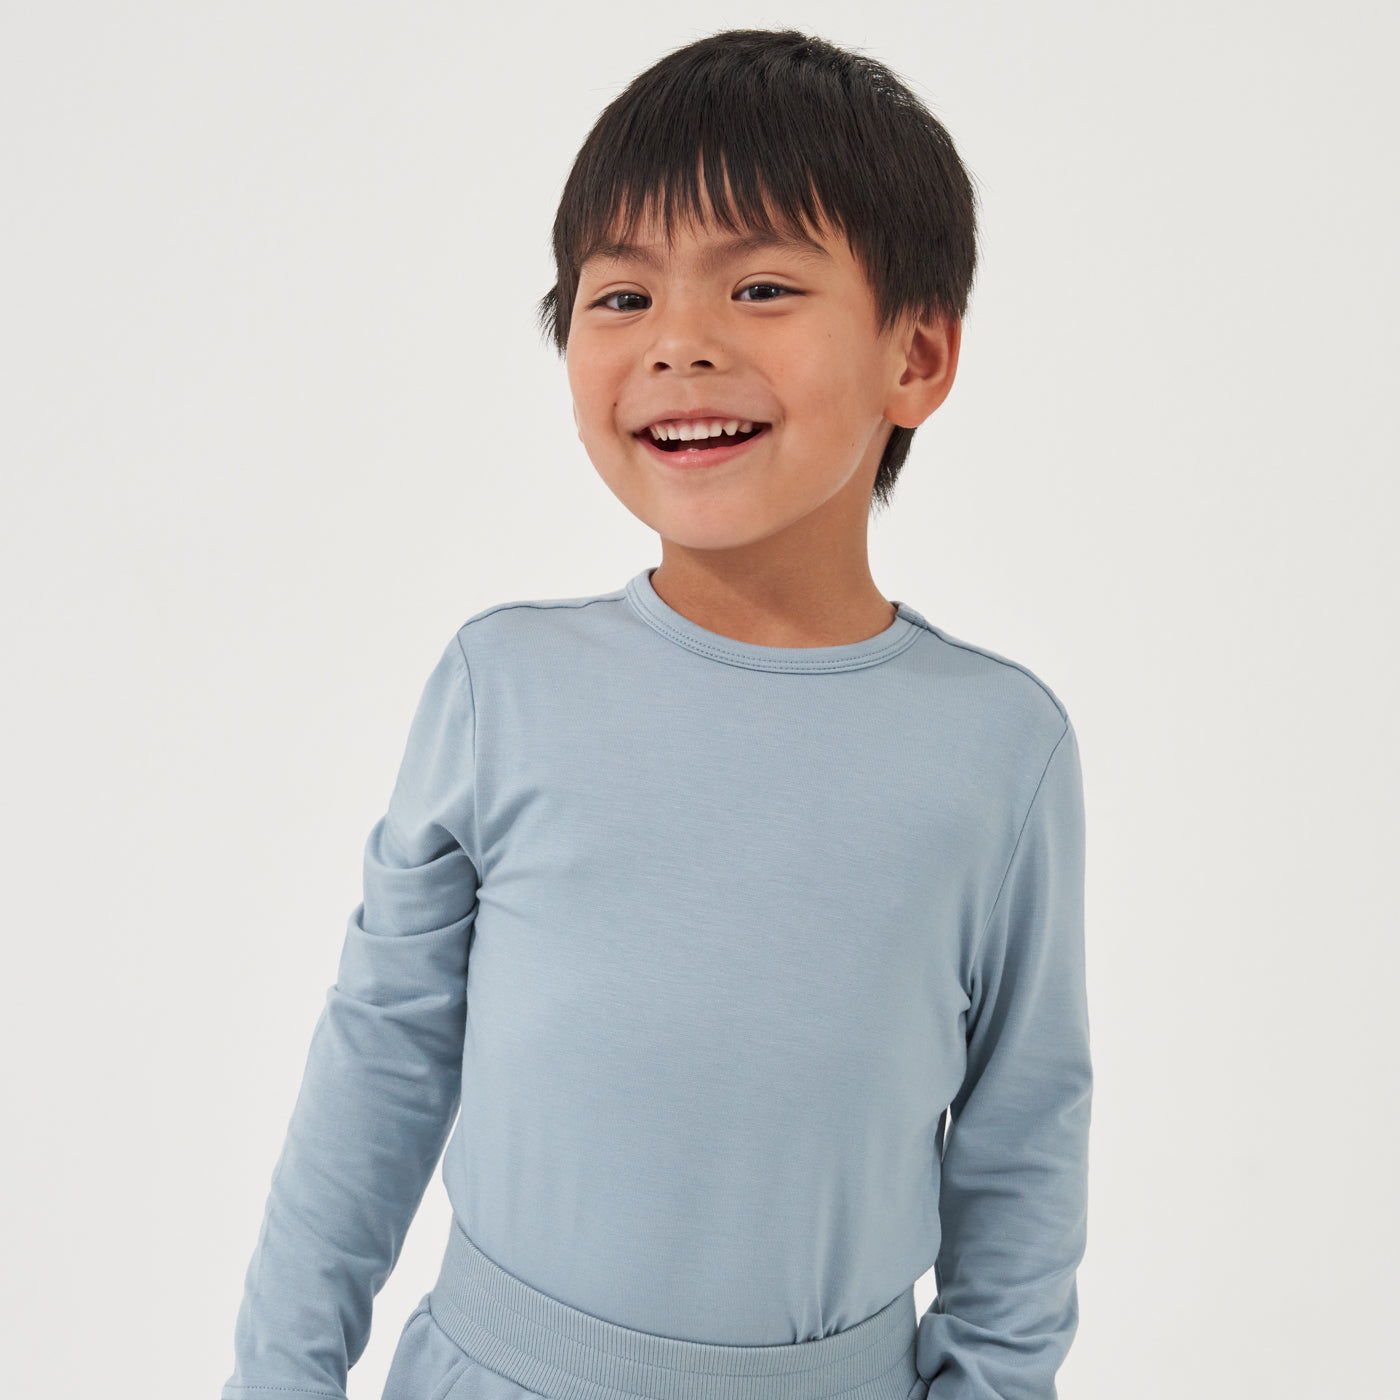 Alternate image of a child wearing a Fog classic tee